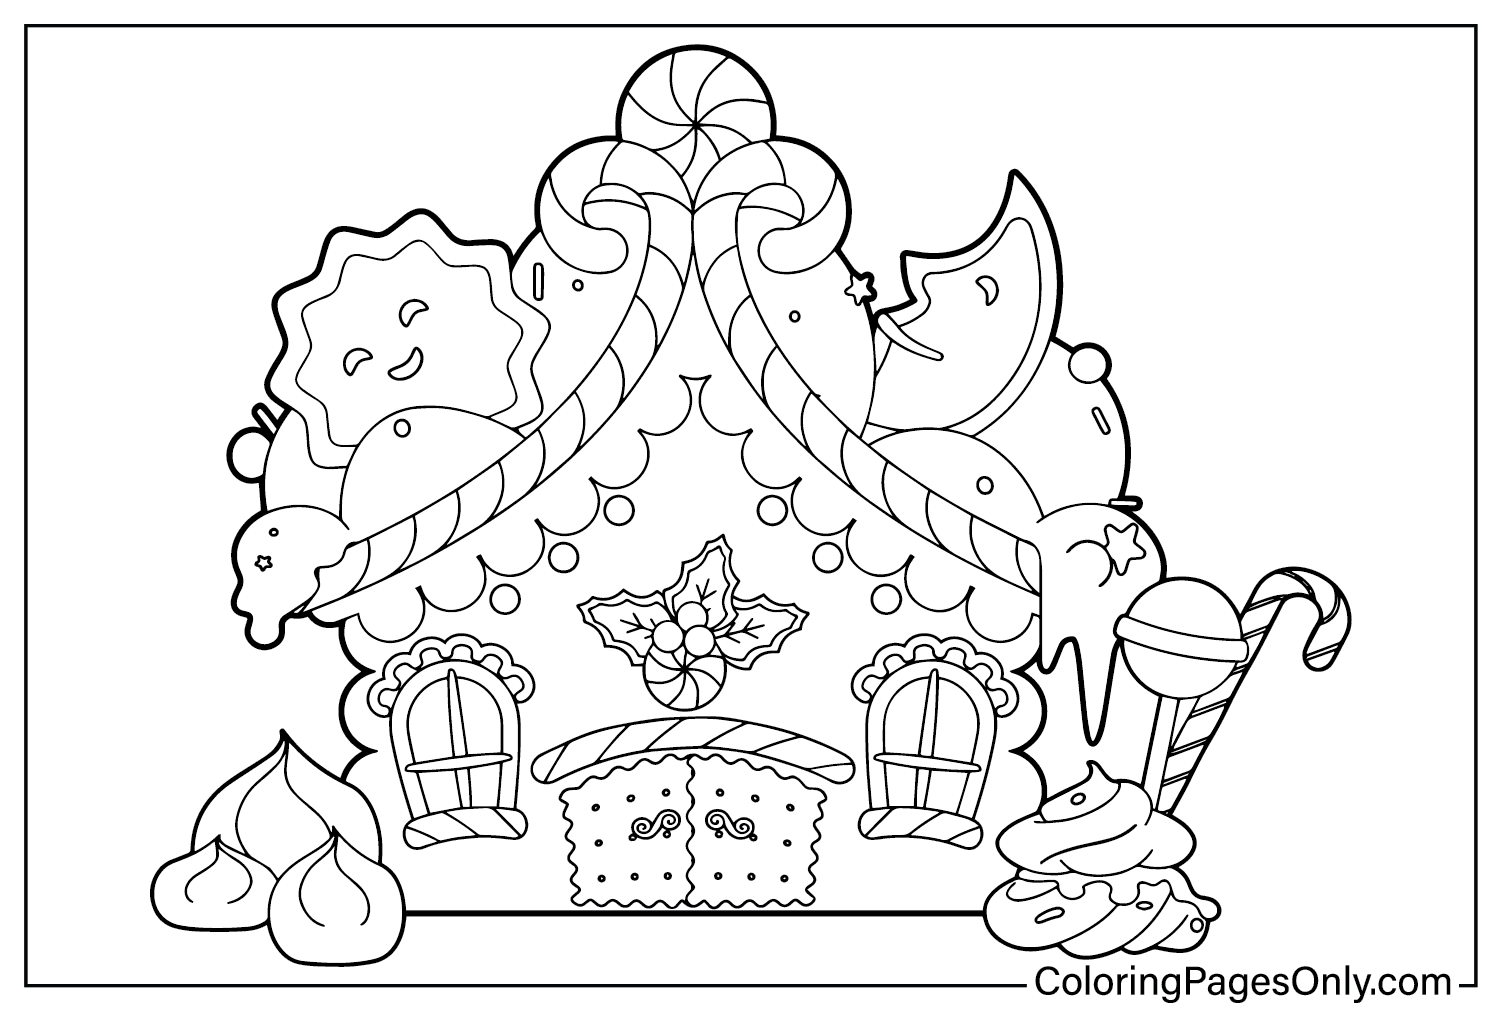 Gingerbread House Pictures to Color from Gingerbread House